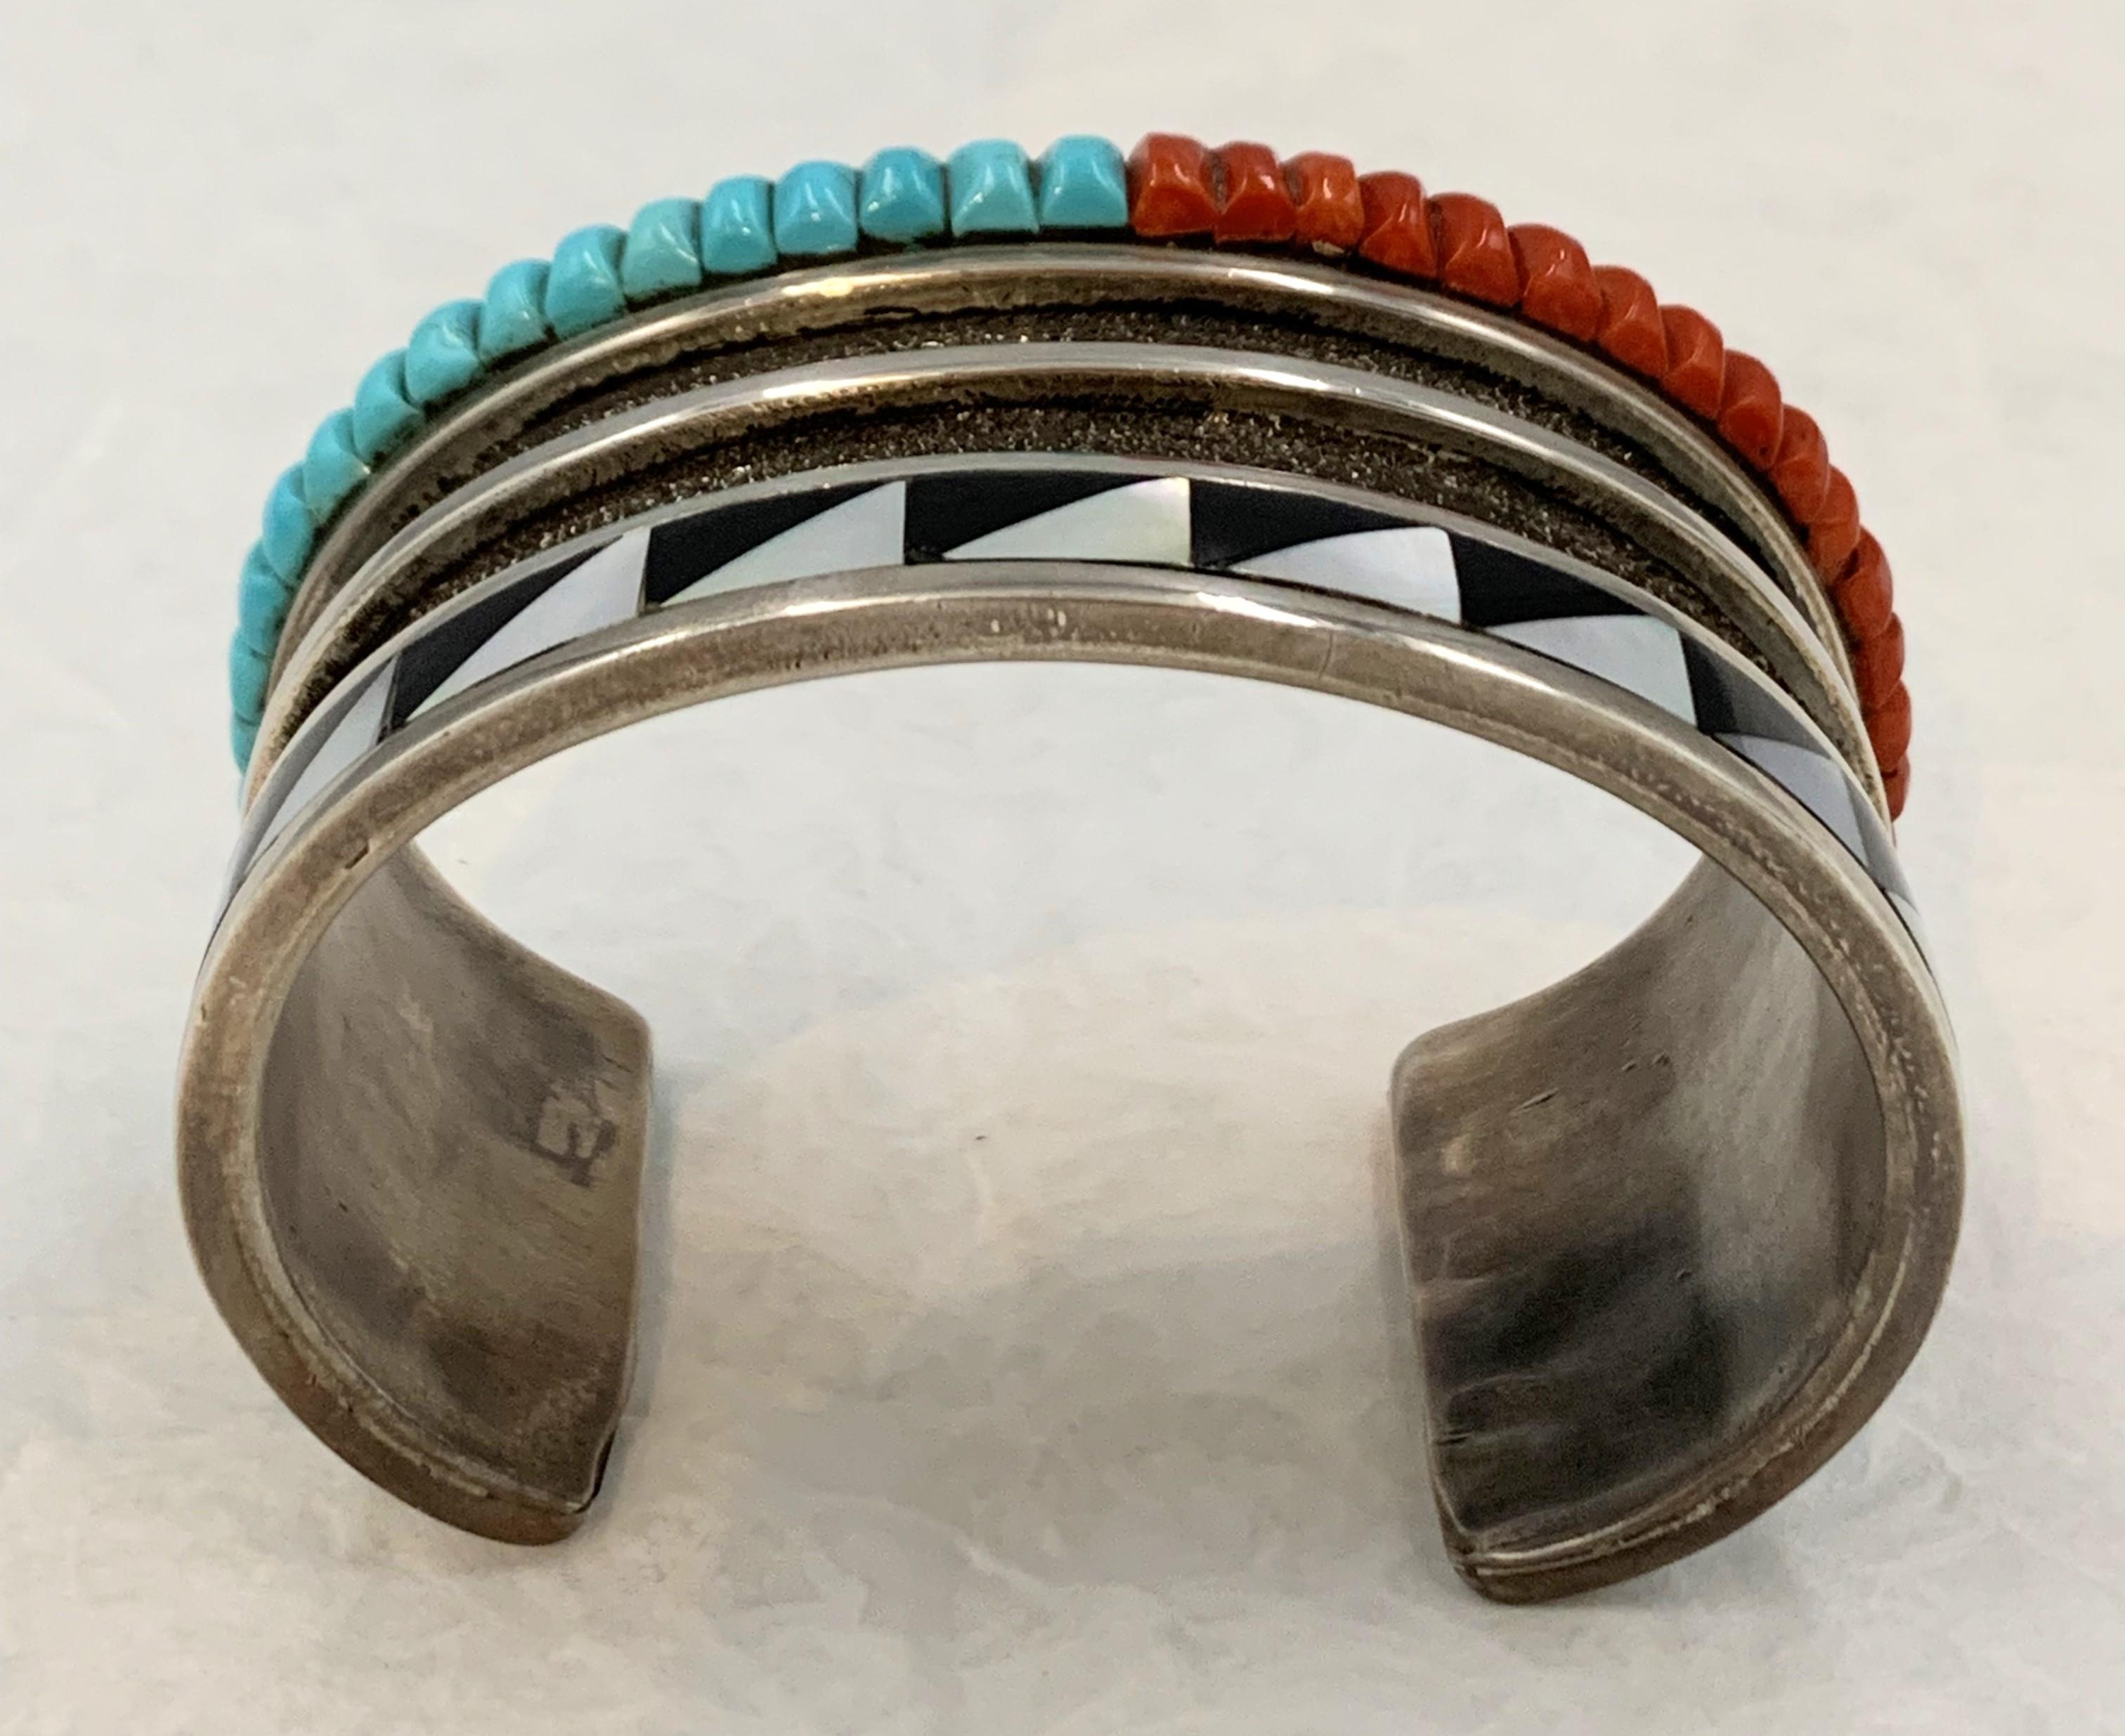 Heavy gauge sterling silver cuff with a row of coral and turquoise stones and jet and mother of pearl inlay. This exceptional cuff is handcrafted by Hopi silversmith Chimney Butte and his wife Nugeum. The 1 1/2” cuff is 5 1/2” inside with a 1 3/8”